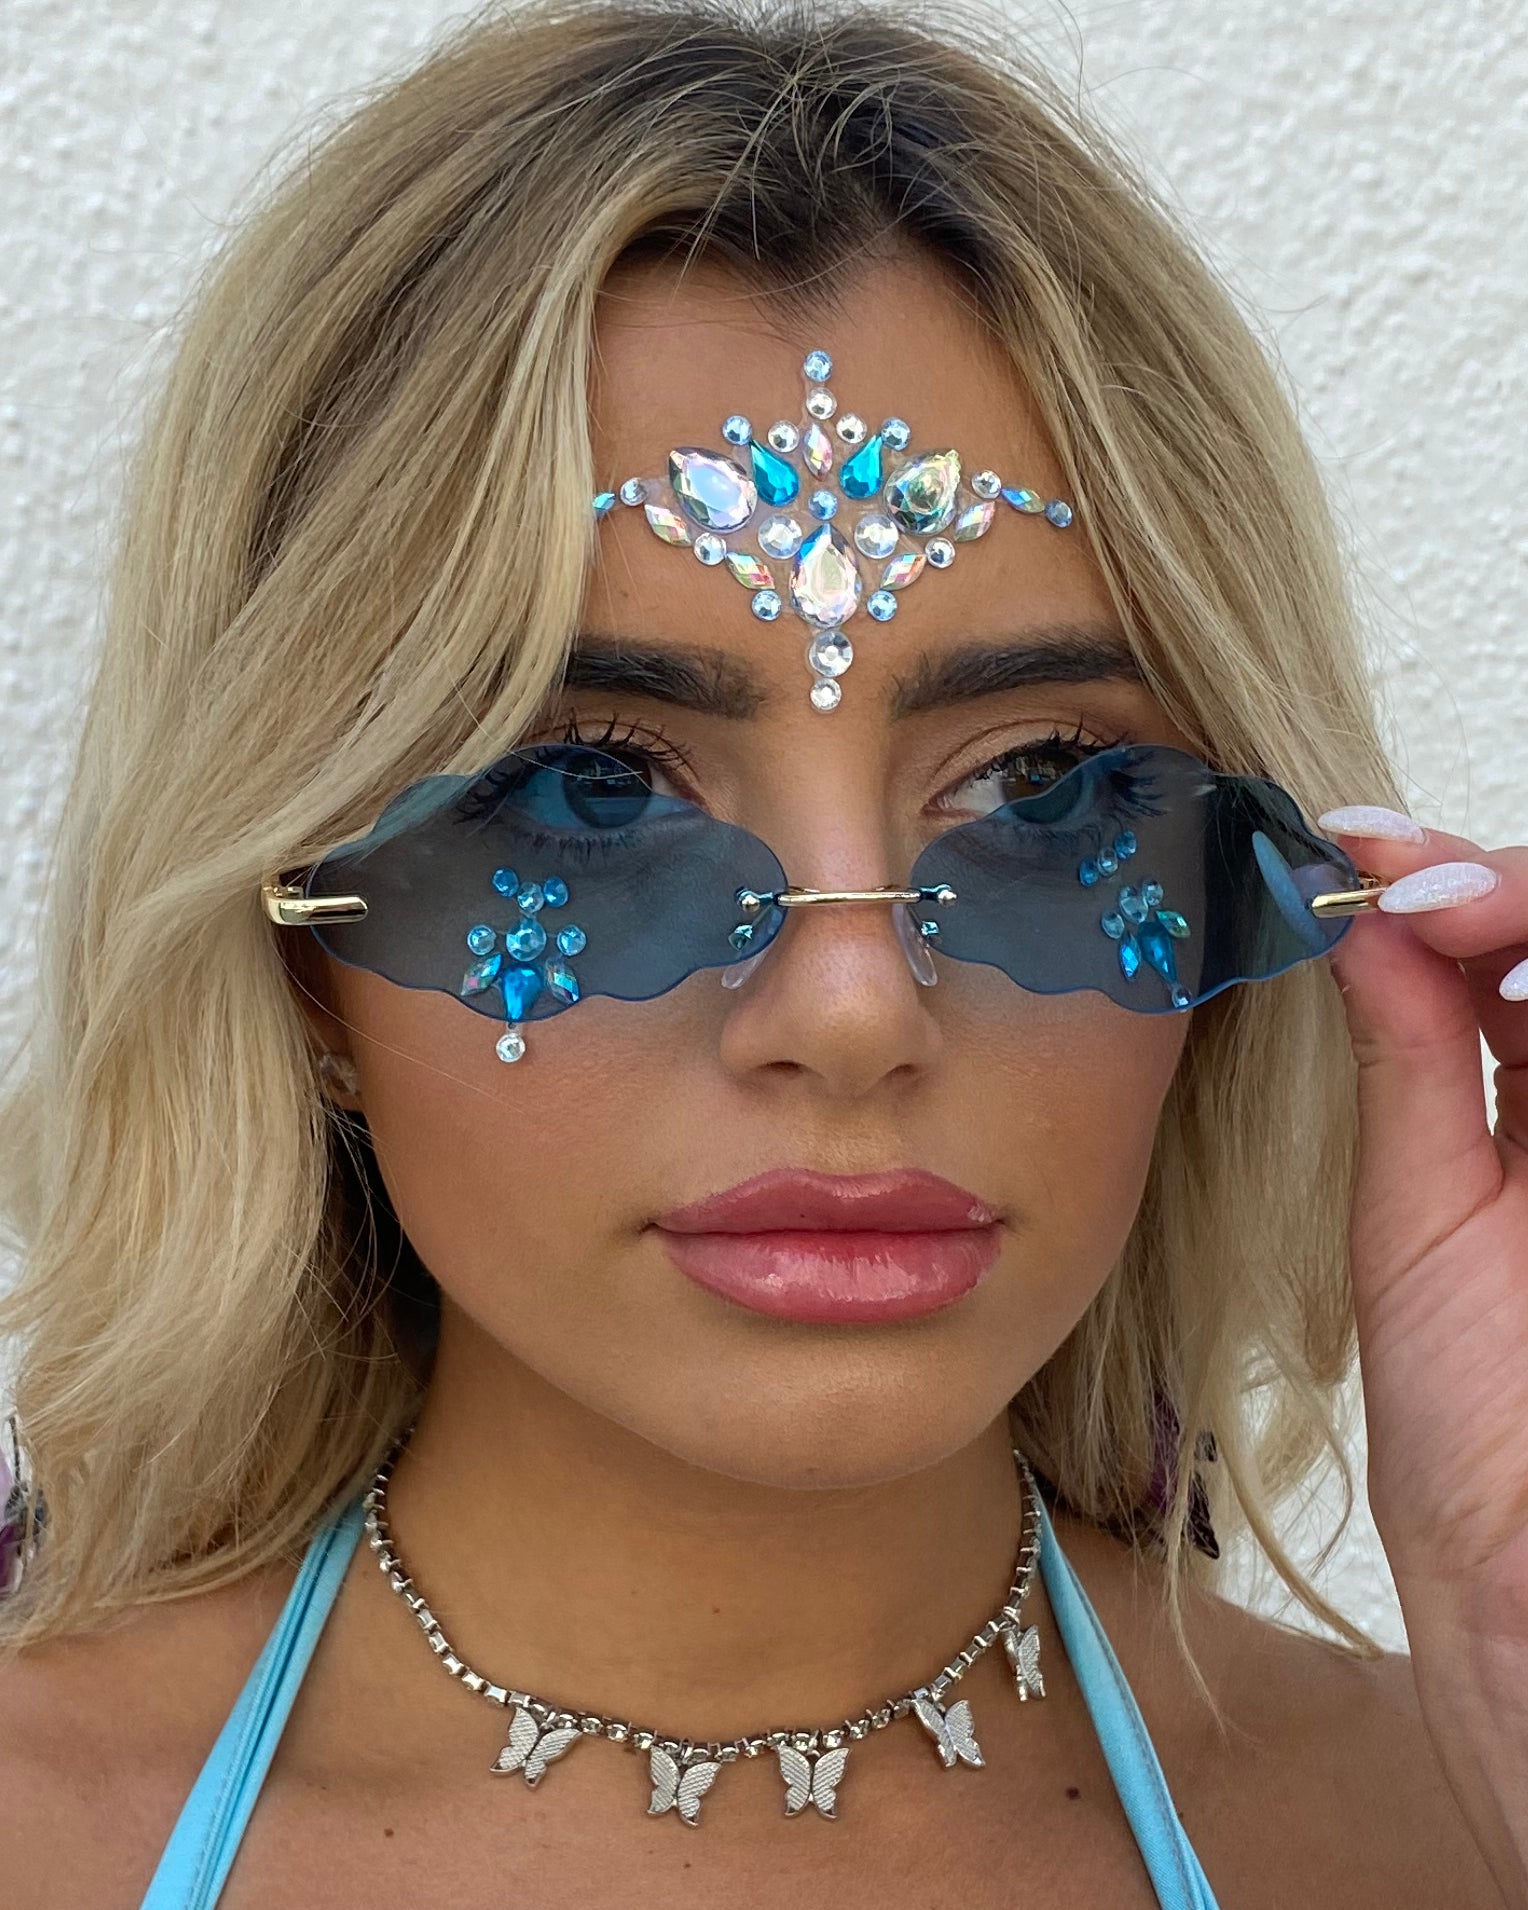 Little Blue Star Rave Pasties - Face Crystal Jewels Body Gems